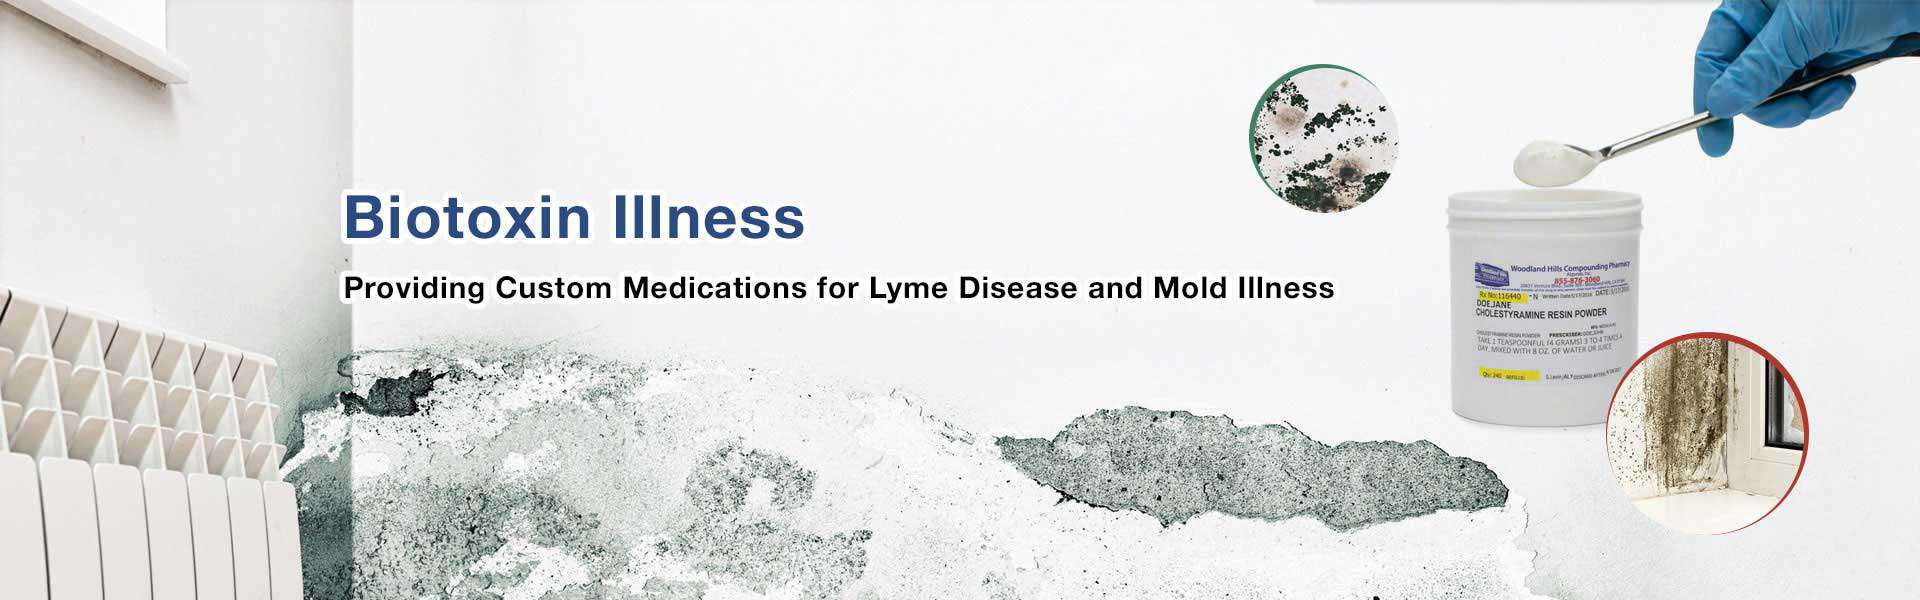 we make custom medications for lyme disease and mold illness